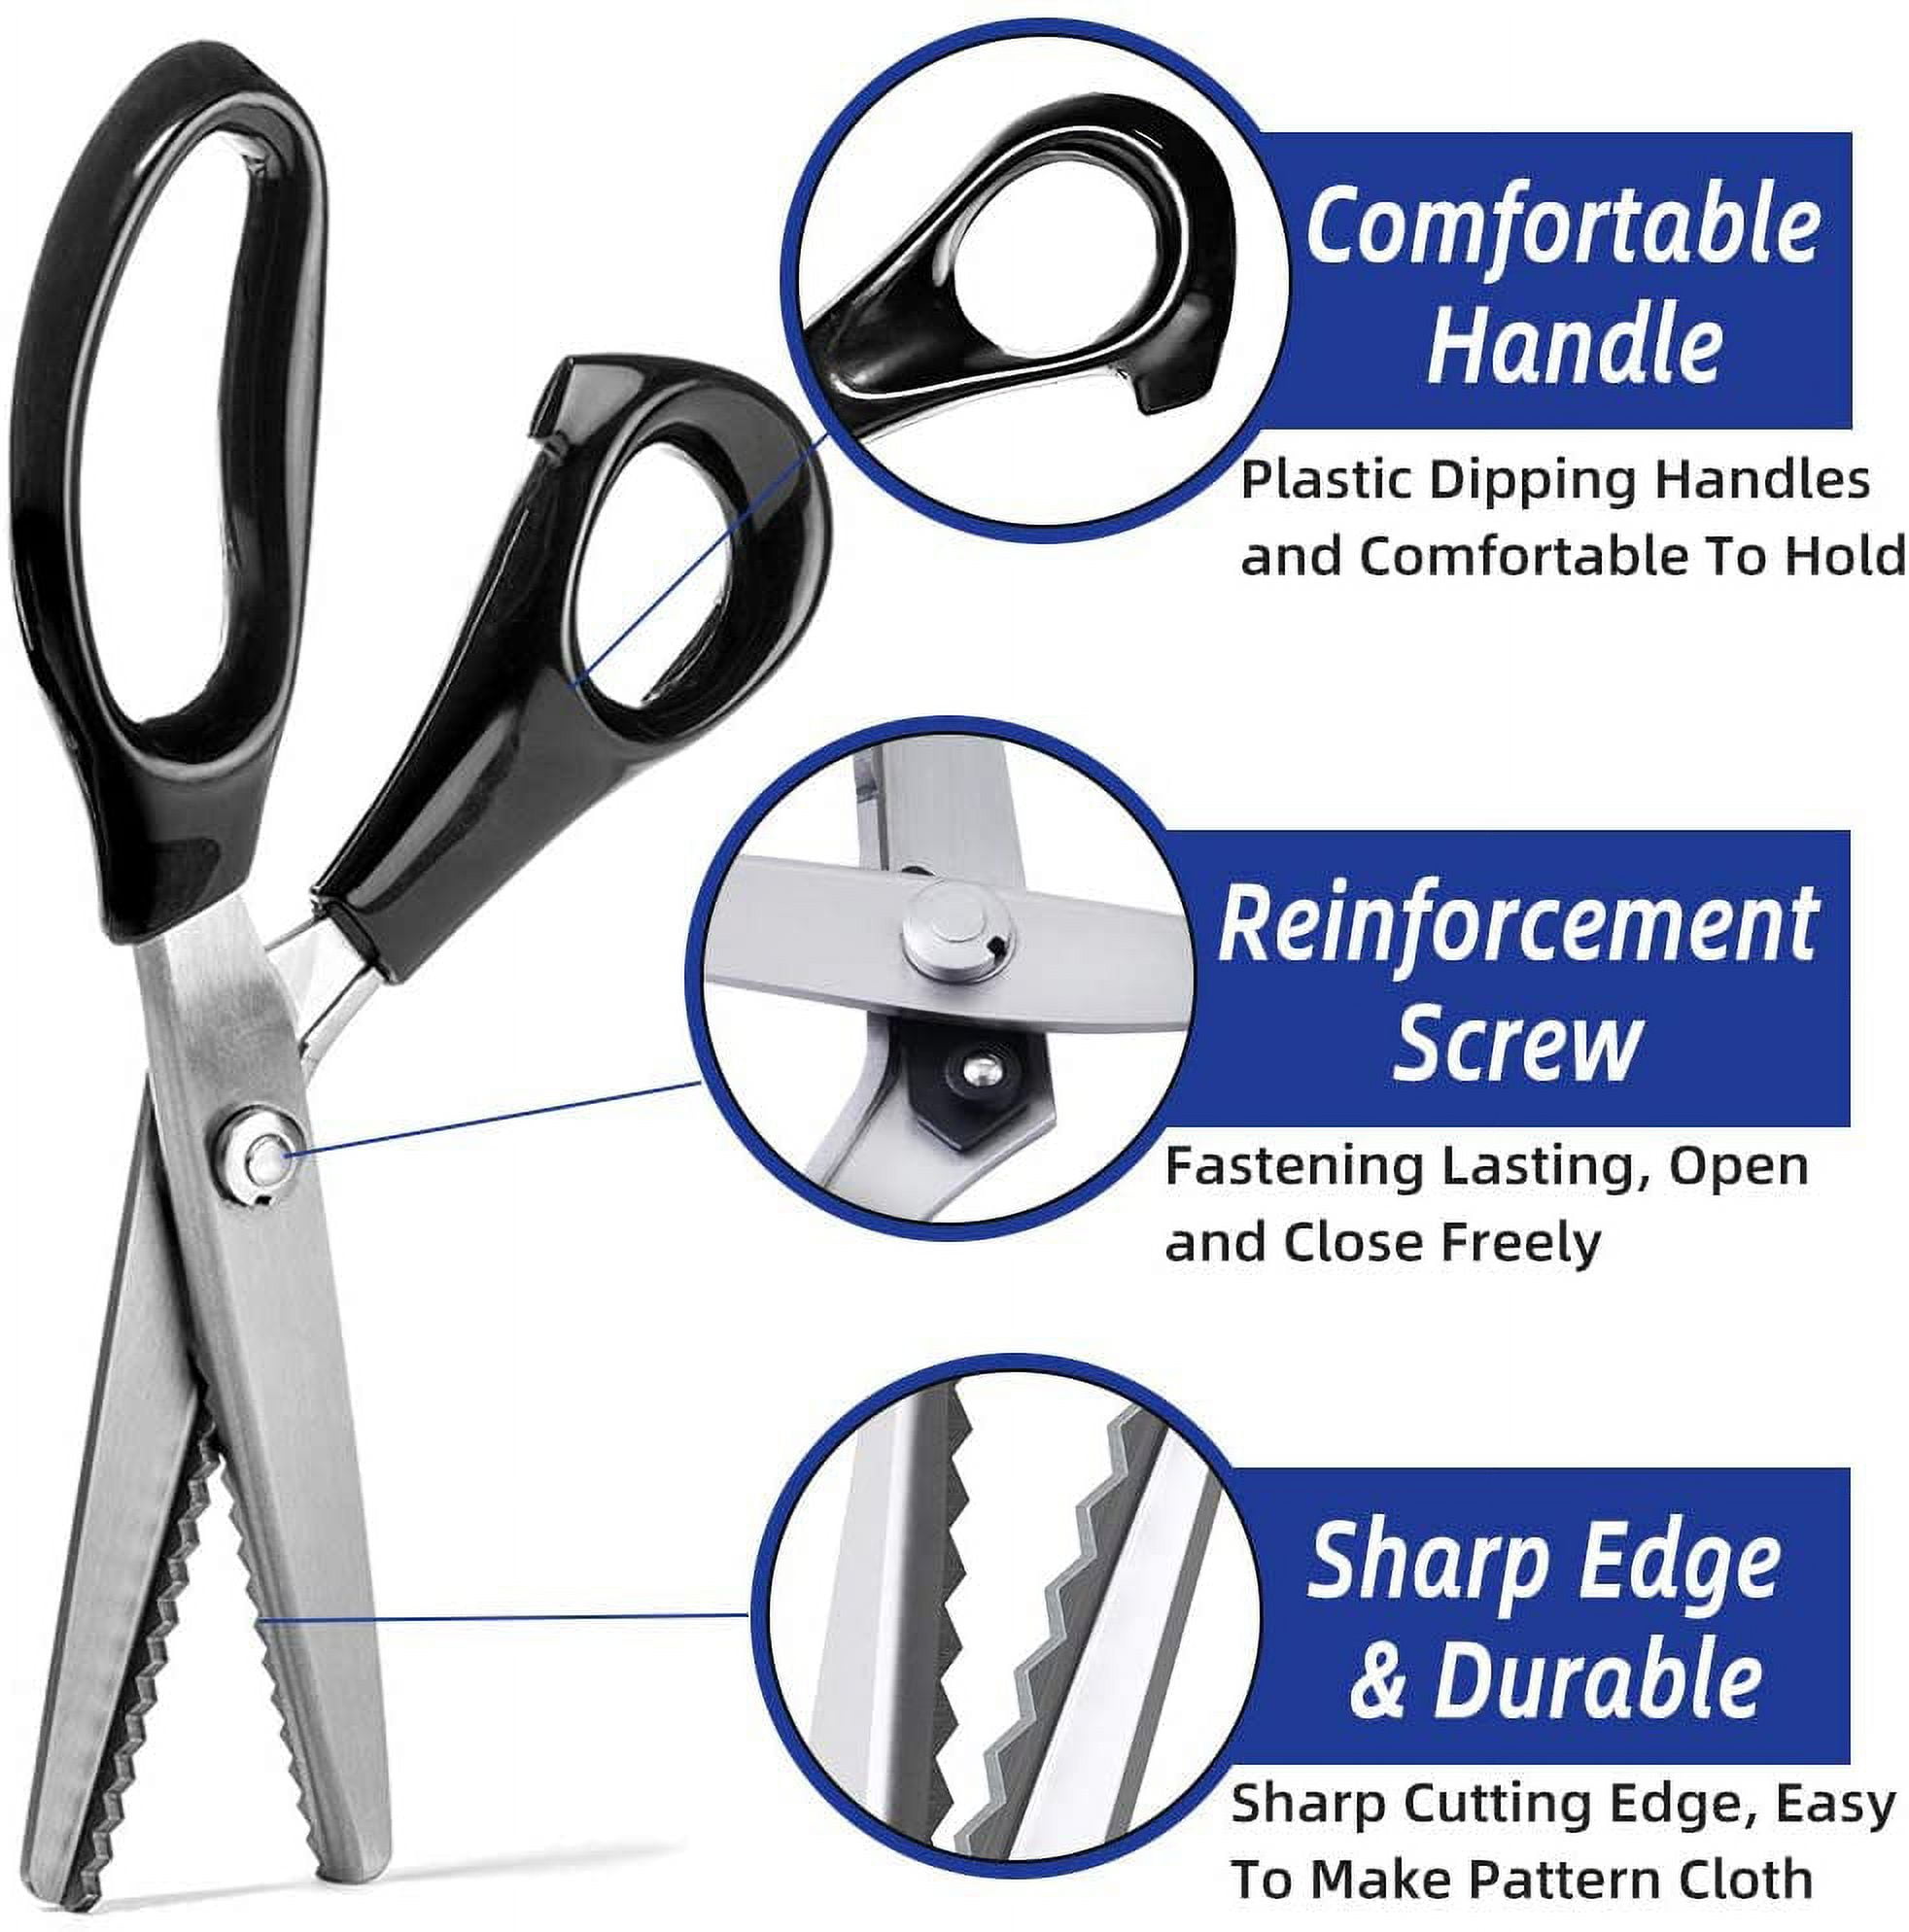 Xemz Professional Pinking Shears, Comfort Grip Handle Stainless Steel Dressmaking Scissors Sewing Art Craft Cut Tool, Serrated and Scalloped Blade